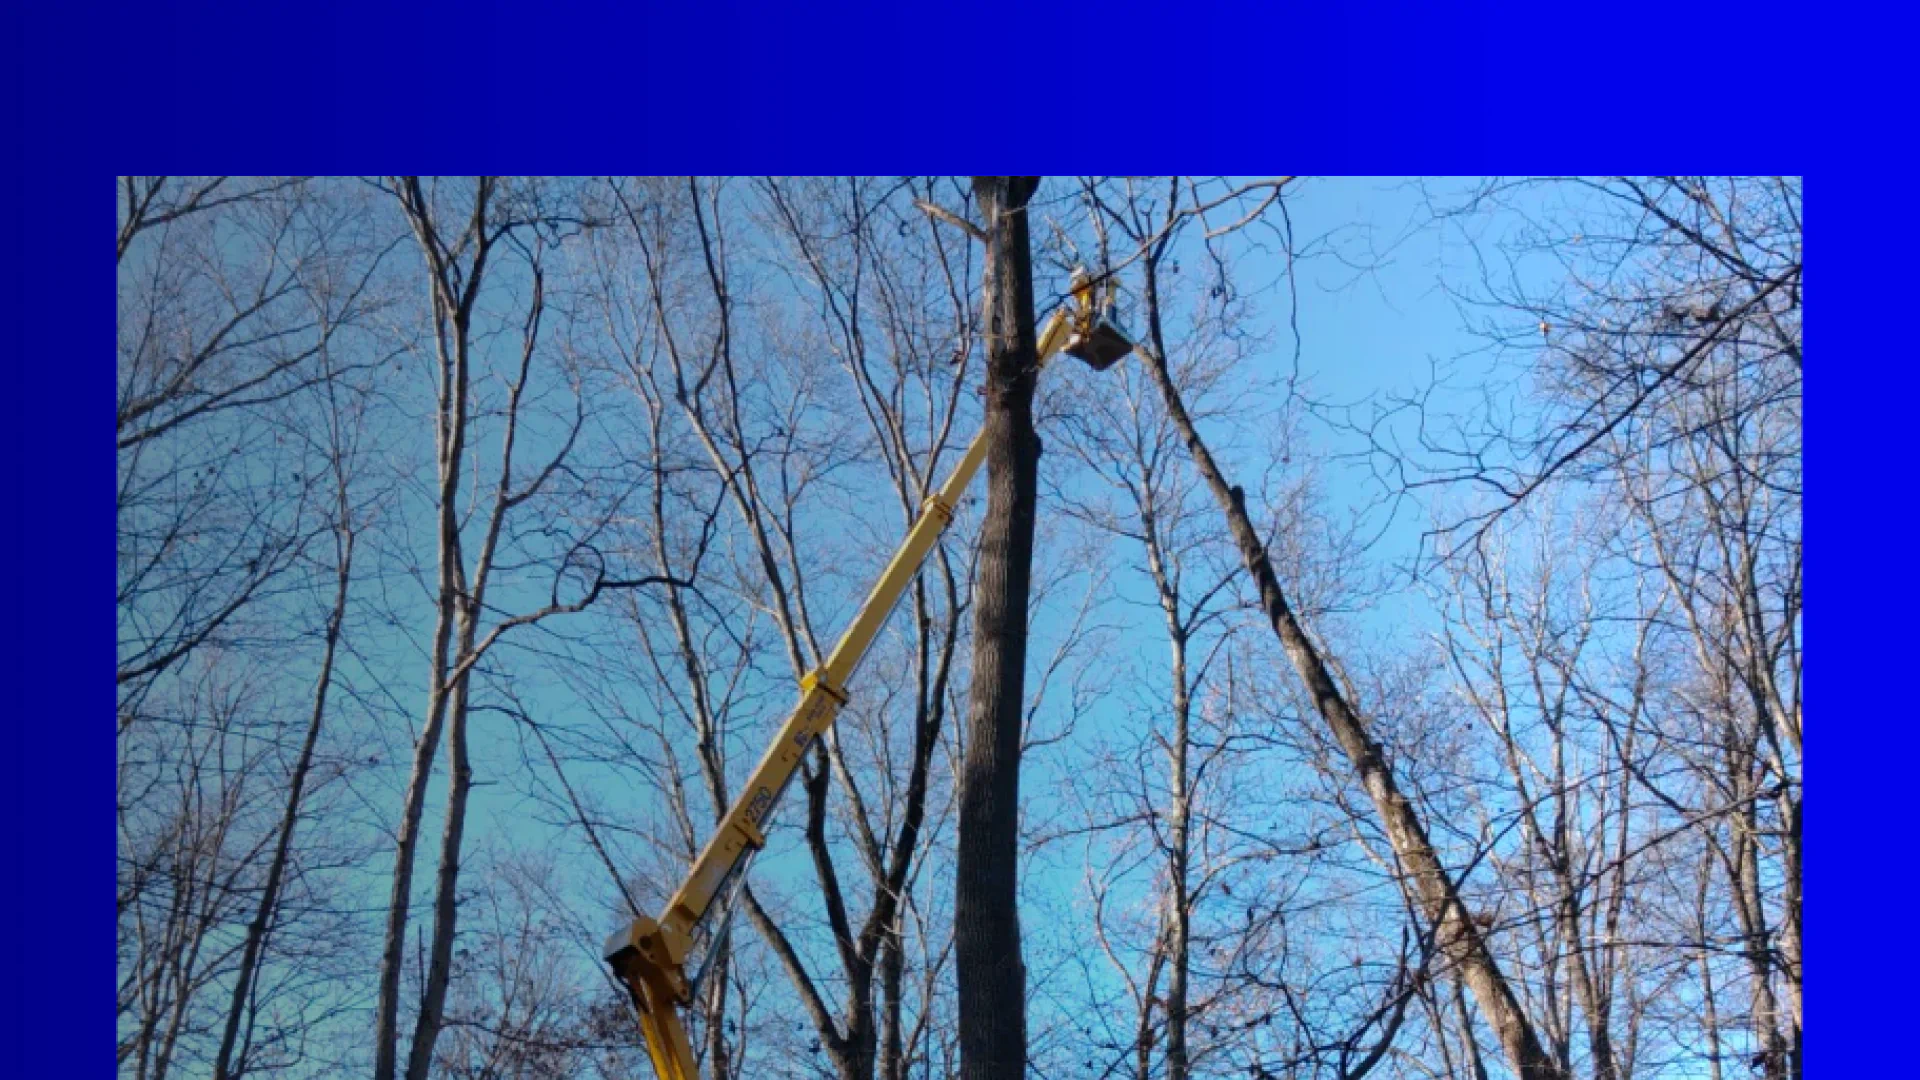 tree removal with bucket truck new hero